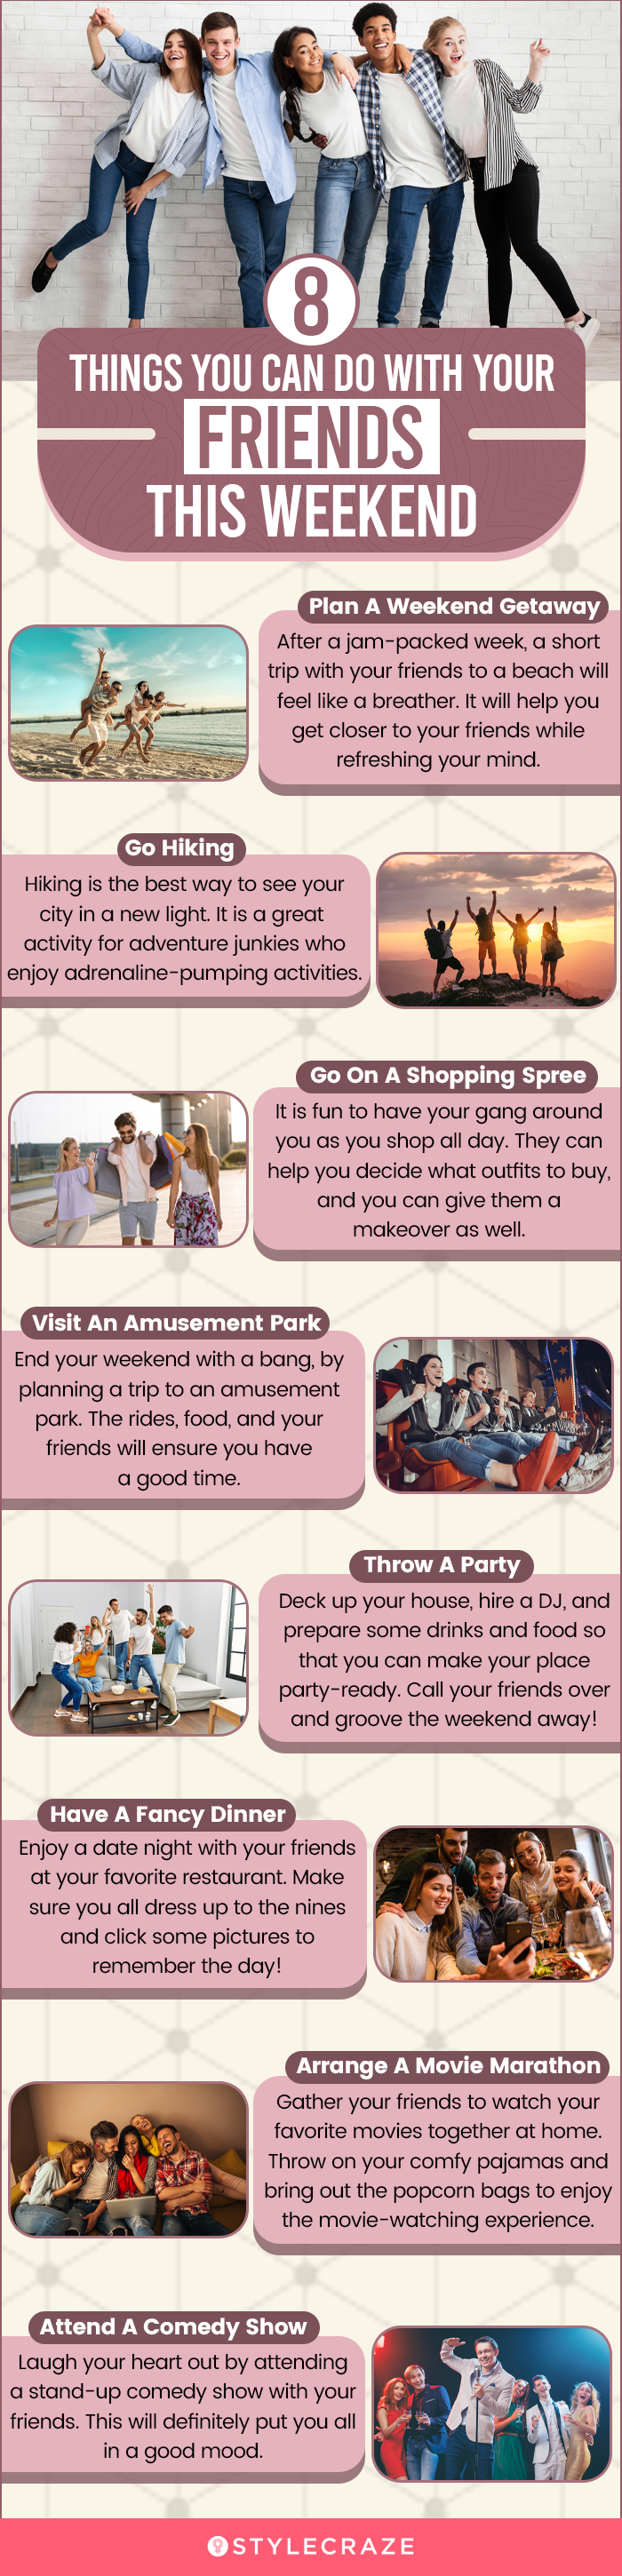 8 things you can do with your friends this weekend (infographic)